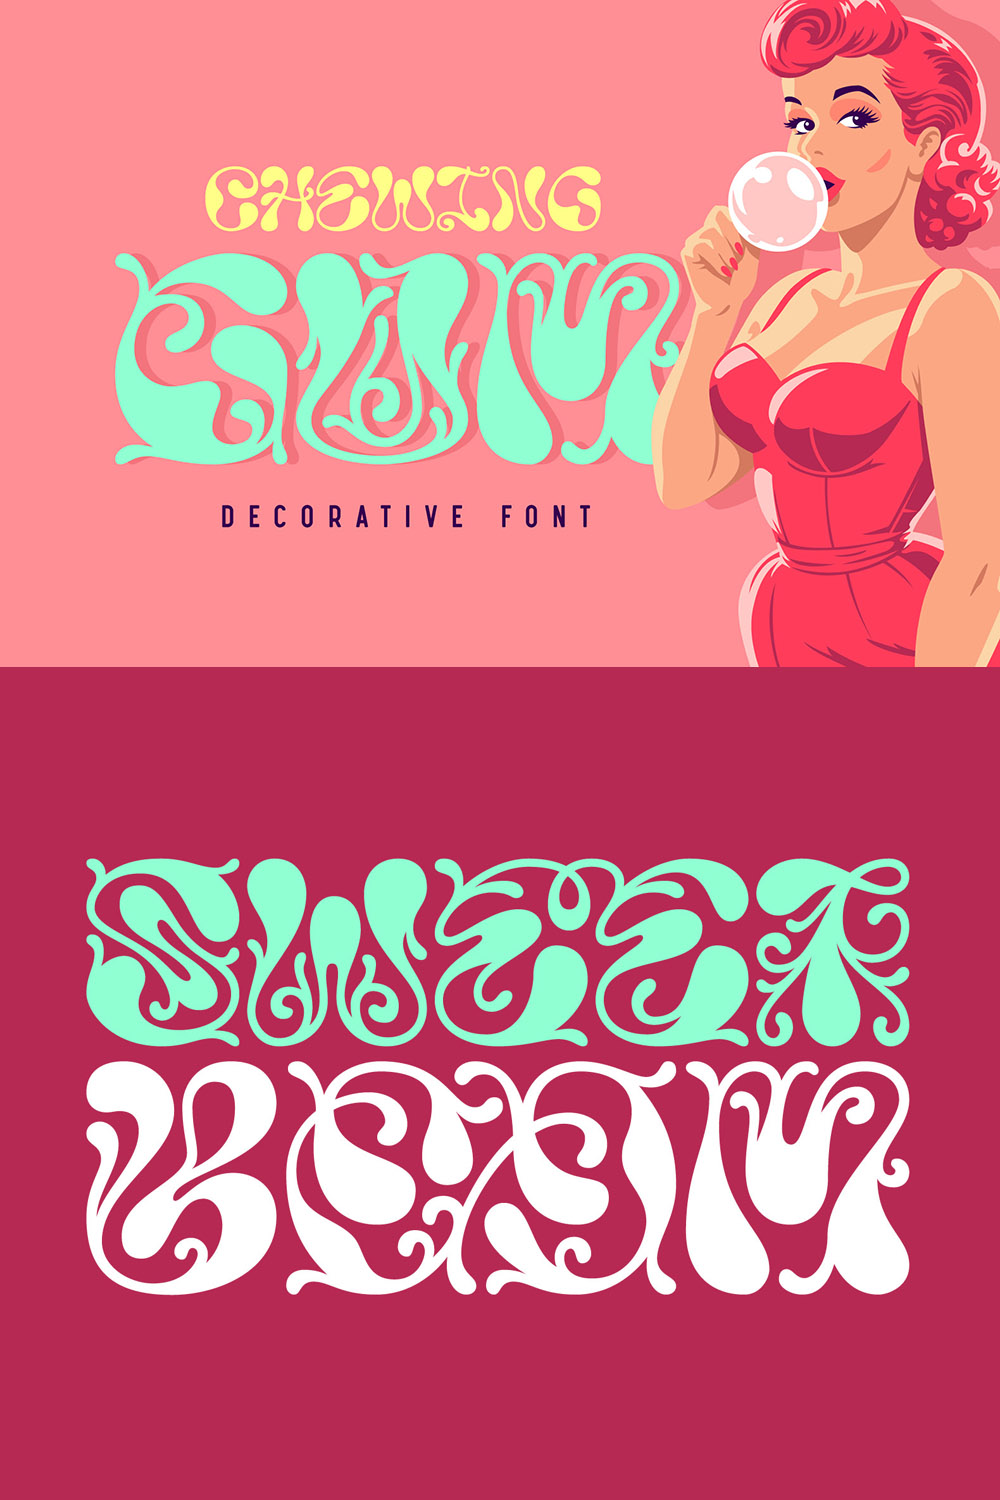 Chewing Gum - Font and Vector Bonus! pinterest preview image.